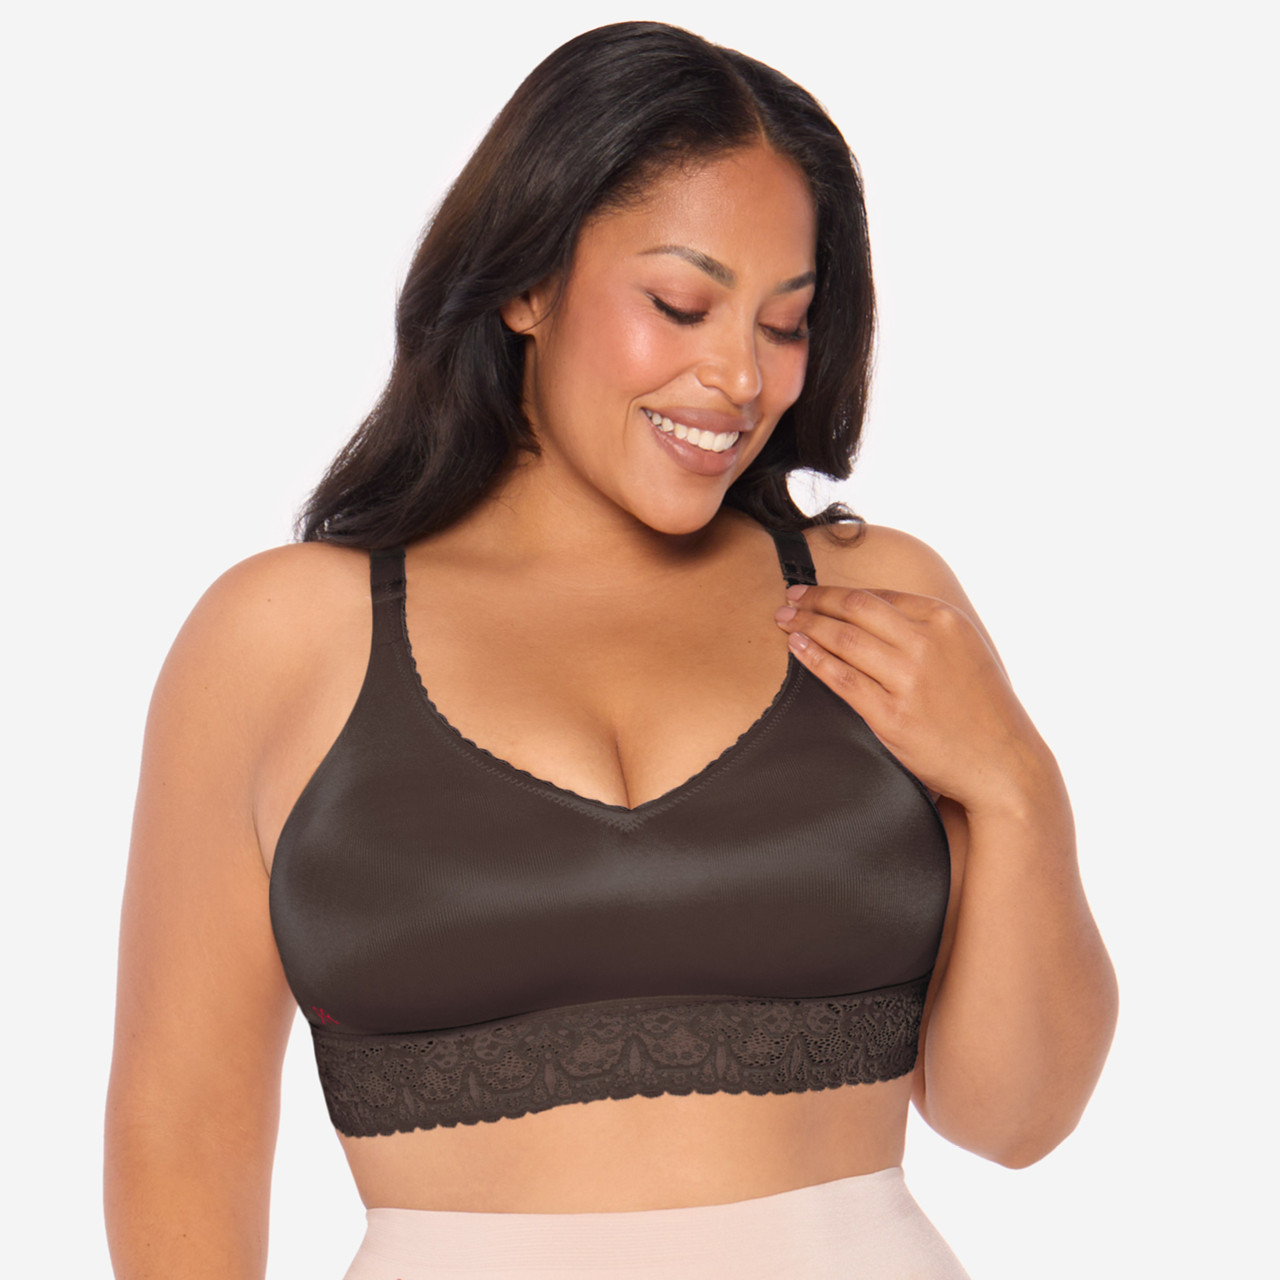 Stylish and Confident: The Ruby Bra from Dim Your Headlights Collection